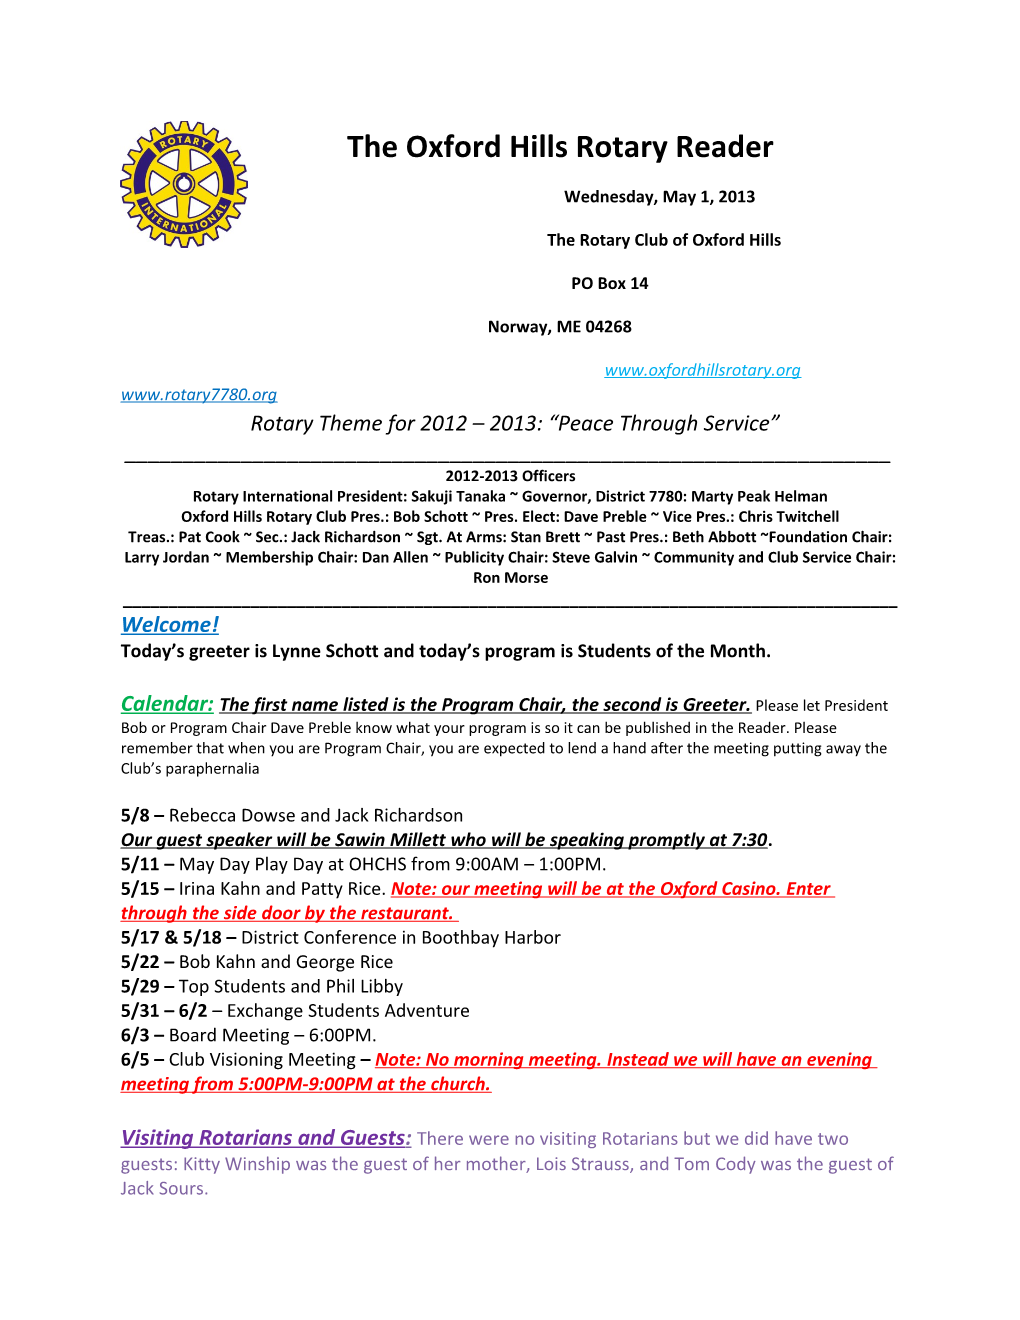 The Rotary Club of Oxford Hills